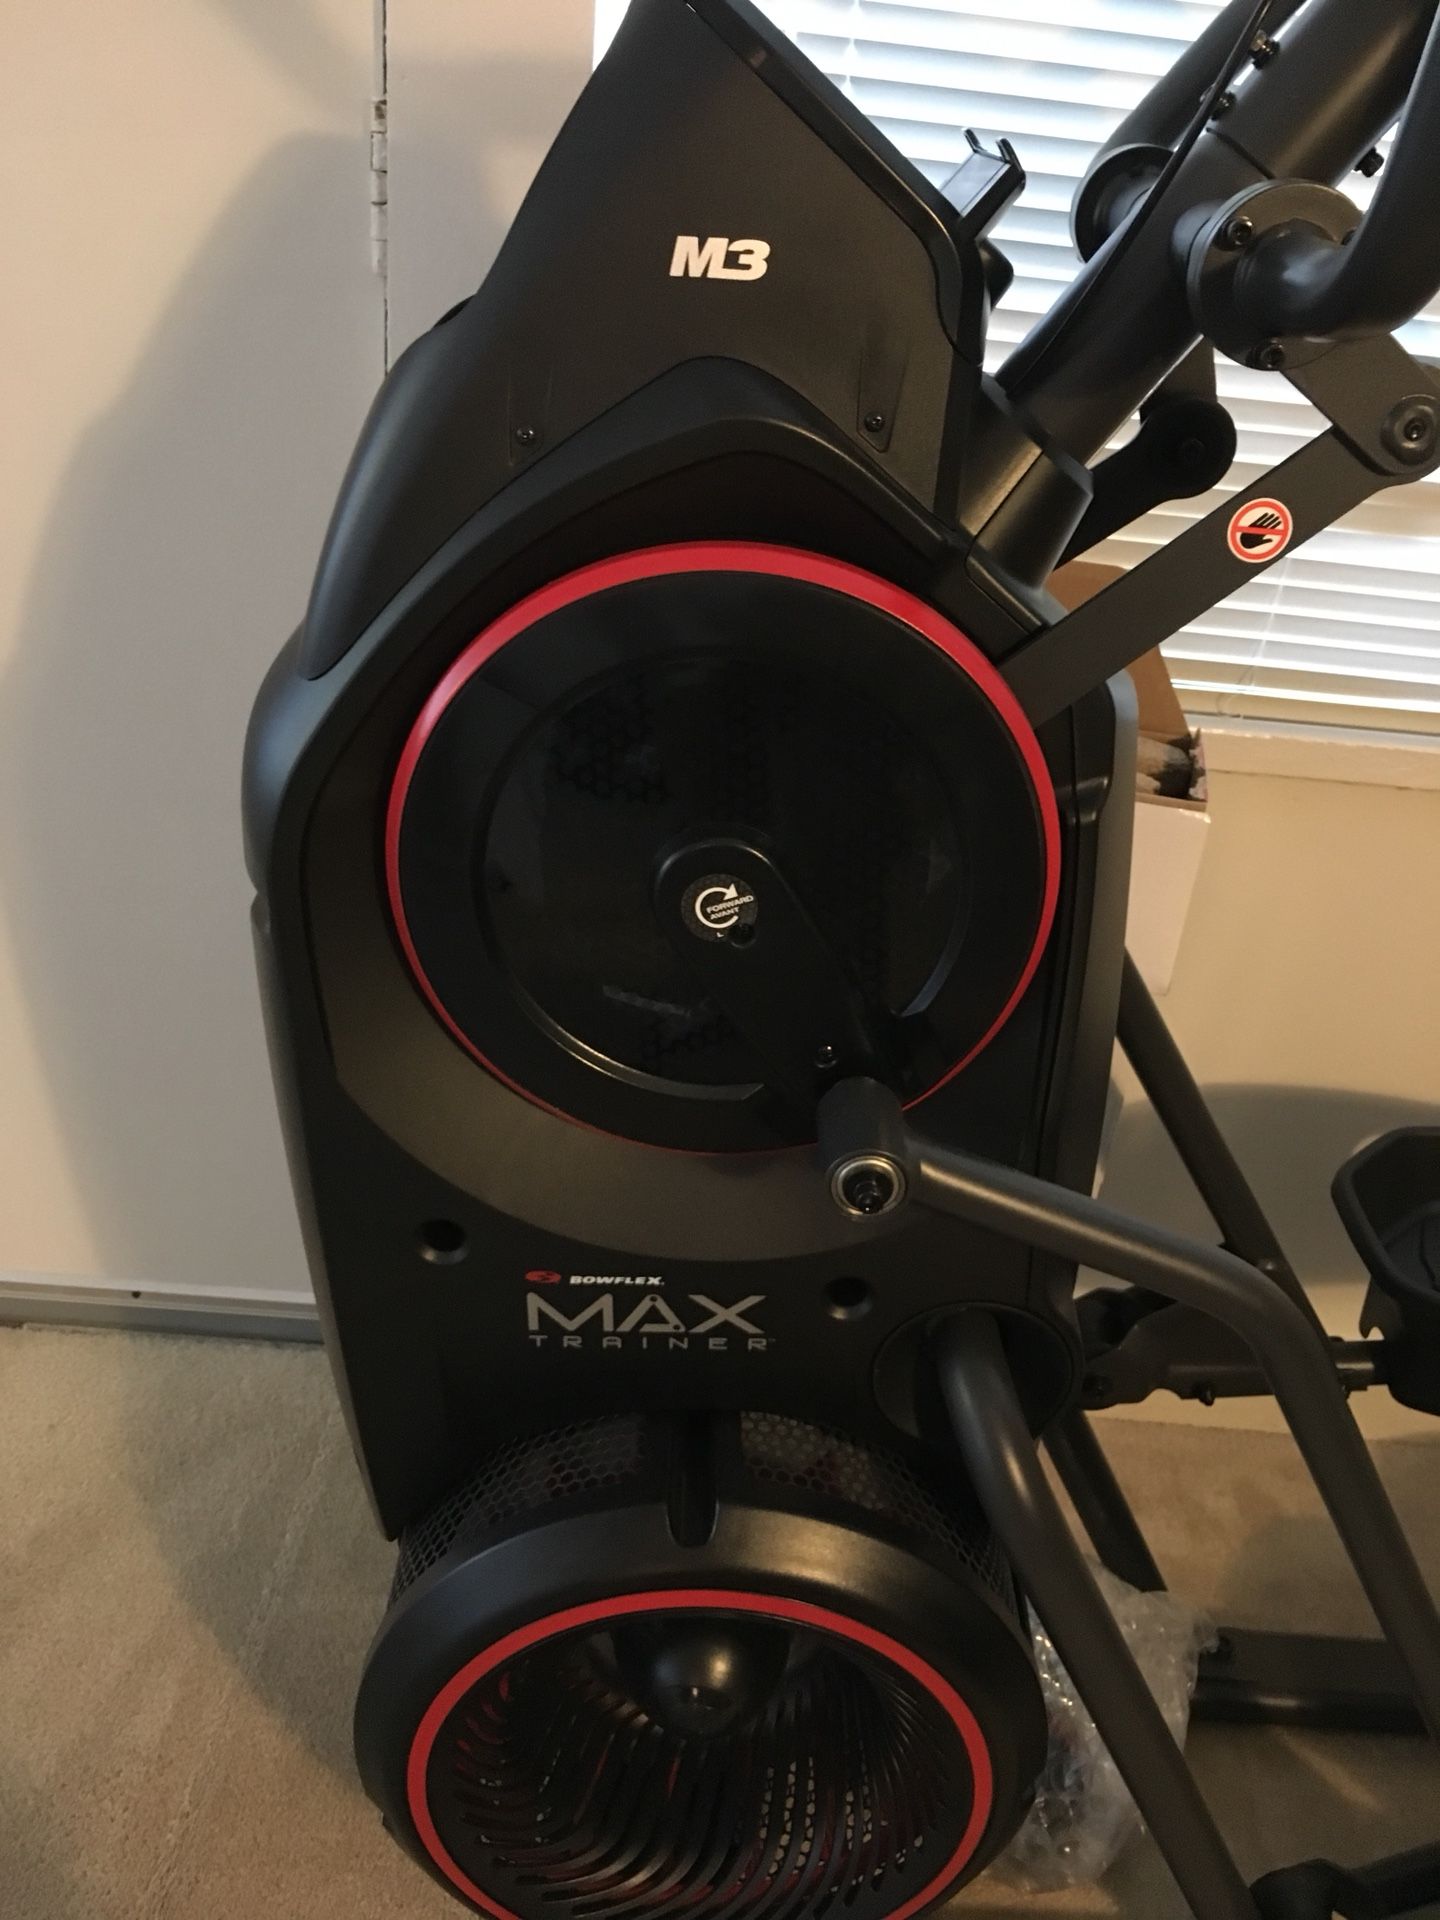 Bowflex max trainer m3 excellent condition ( like new) come whit a mat